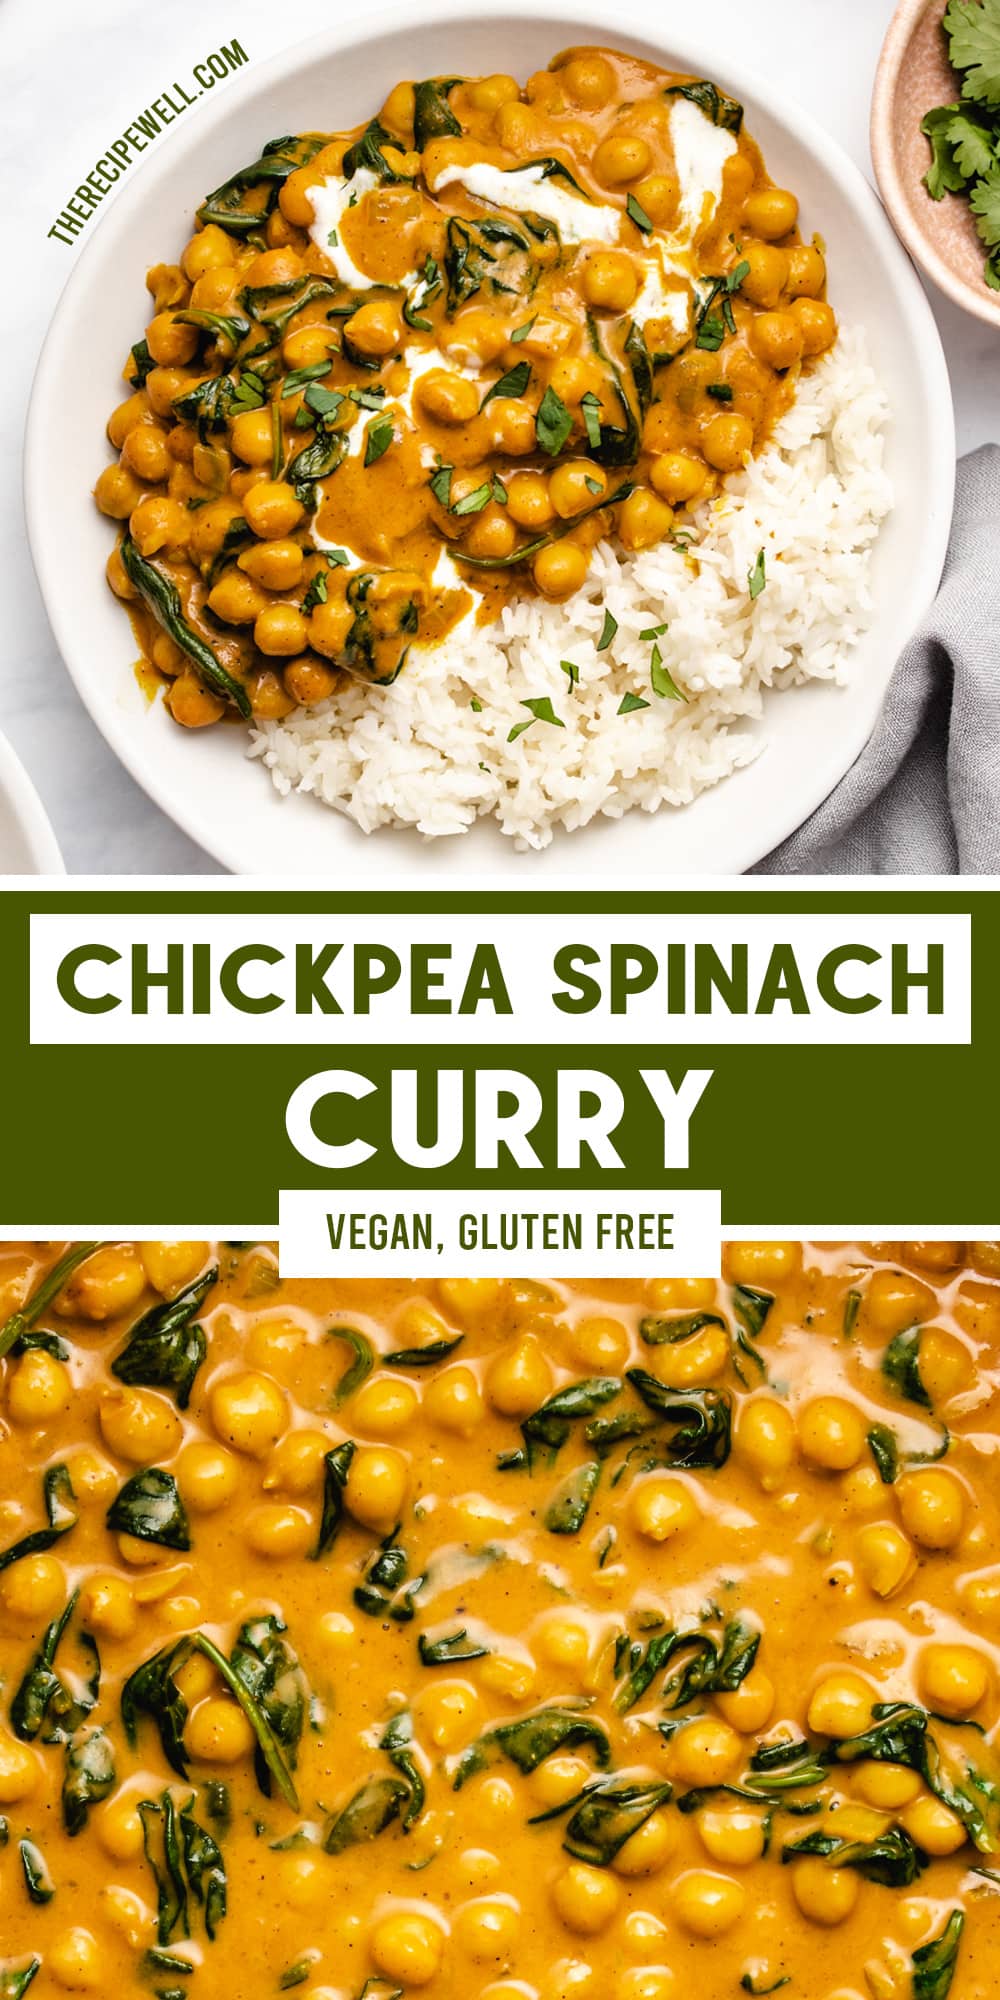 This quick and easy vegan Chickpea Spinach Curry is a great dinner option for busy weeknights! Made with coconut milk and warming spices, you will love this creamy, comforting dish. It's perfect for meal prep too! via @therecipewell